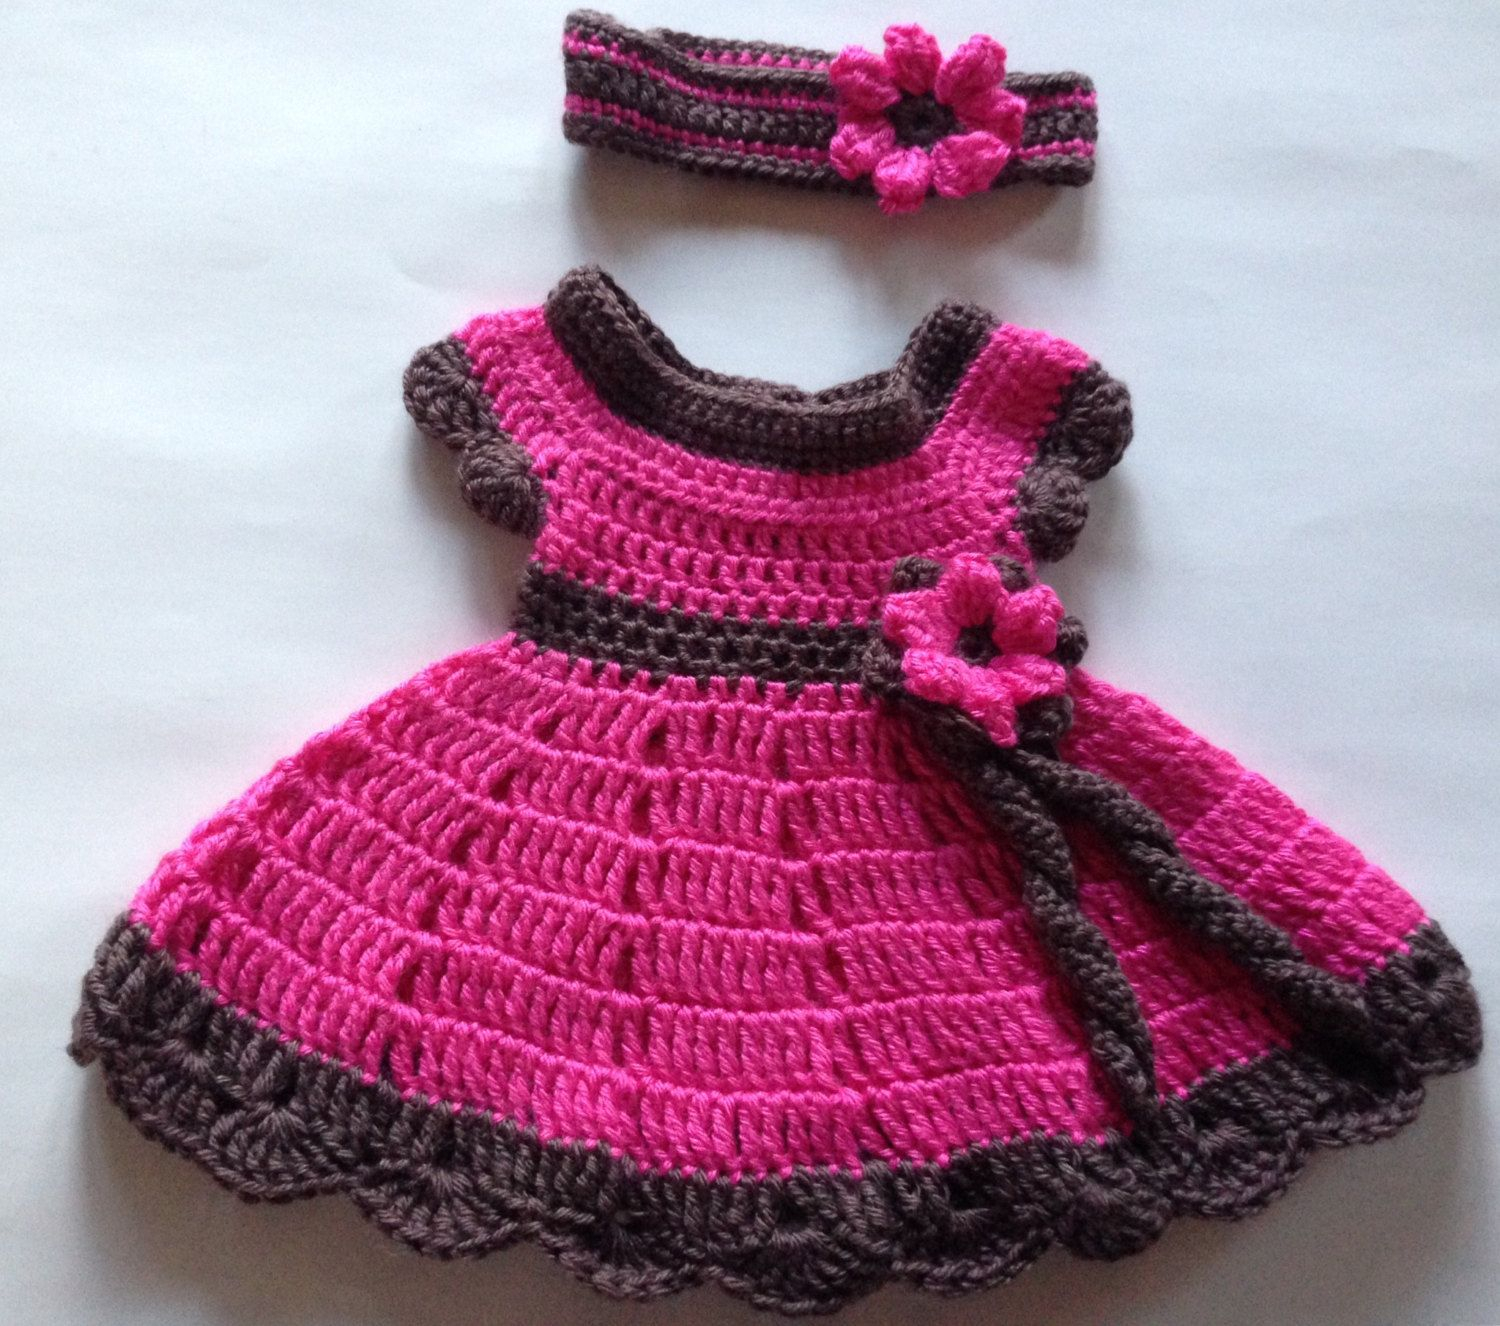 Crochet Baby Dress Free Pattern Pink And Brown Crochet Ba Dress And Headband With Flower